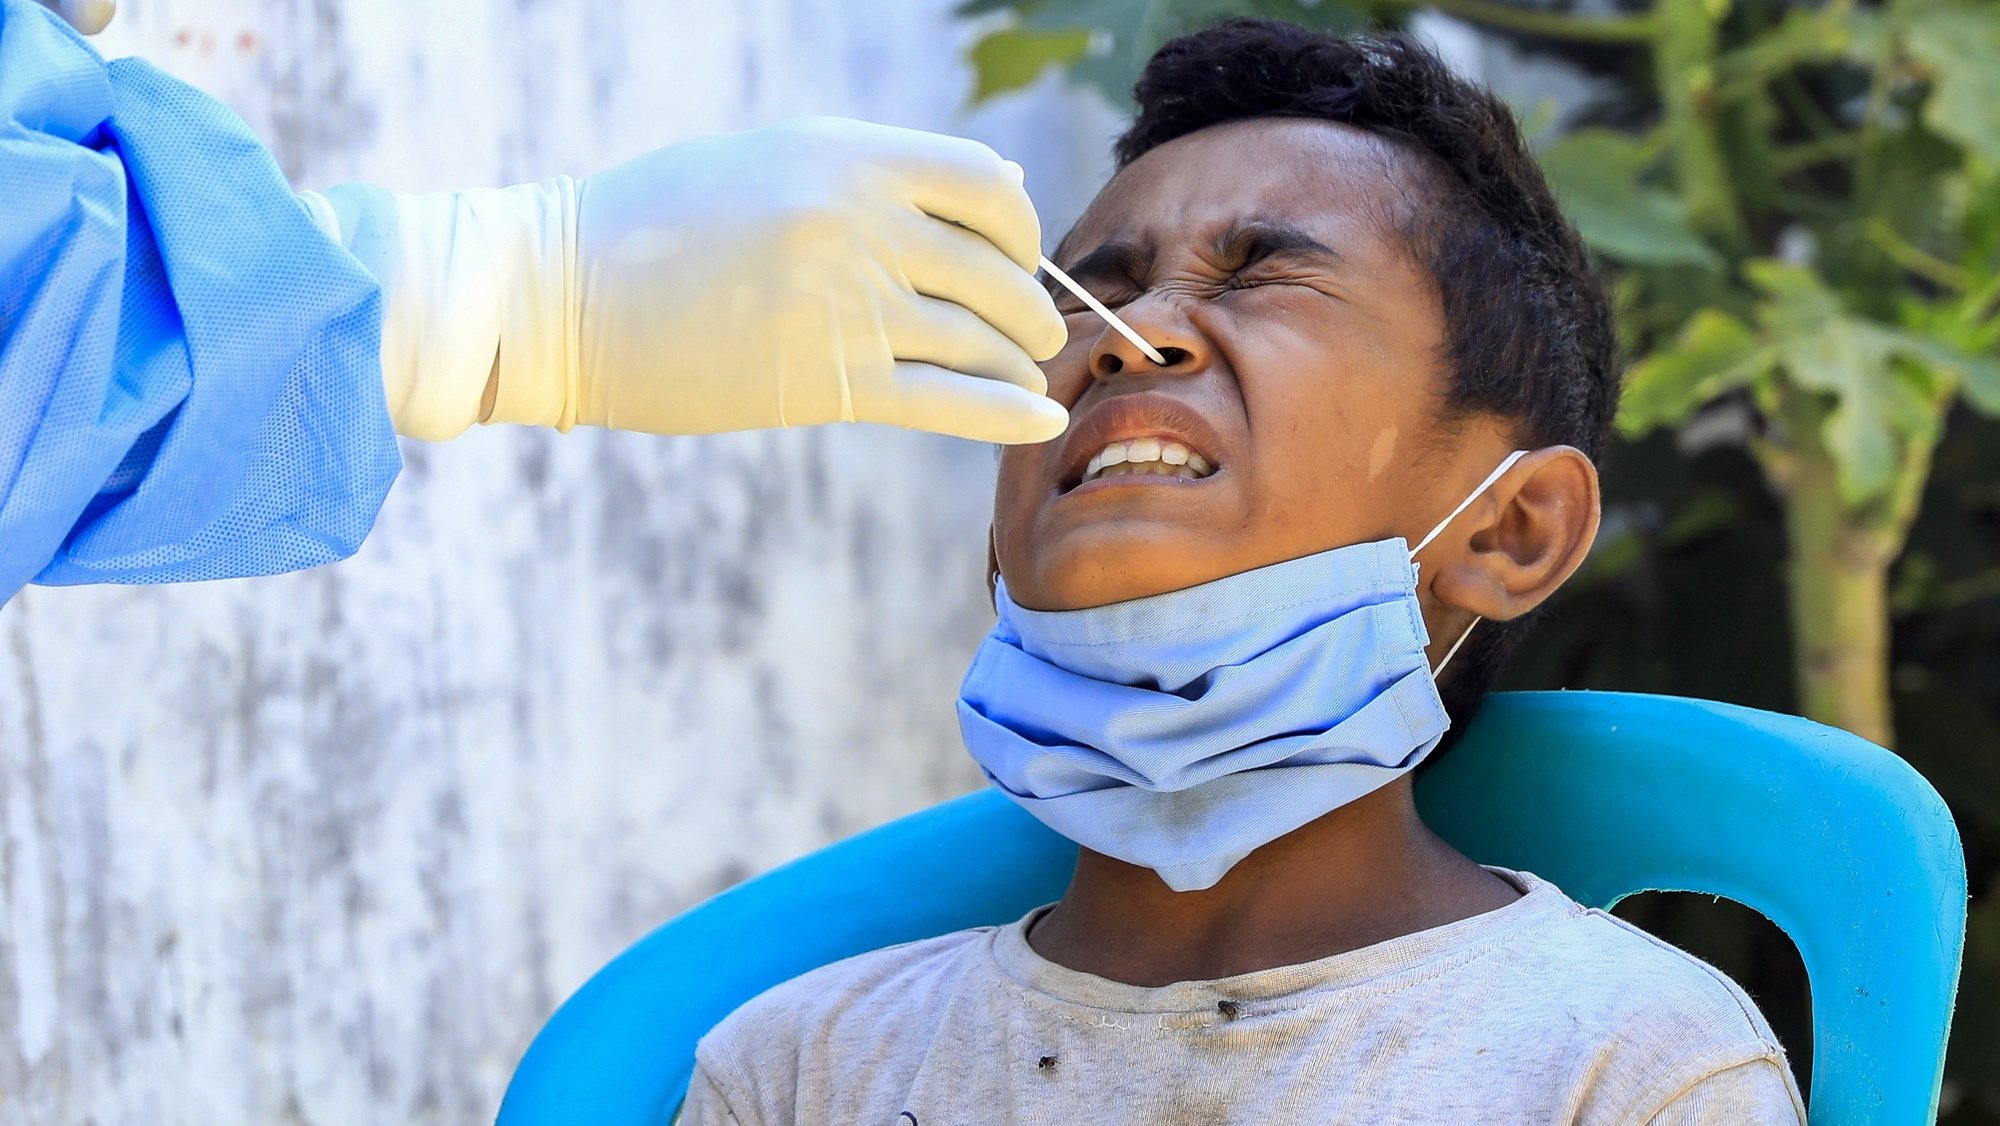 epa09079361 A boy reacts as a healthcare worker collects his specimen samples during a COVID-19 swab test in Dili, East Timor, also known as Timor Leste, 17 March 2021. With less than 300 COVID-19 cases and zero deaths, Timor Leste recorded the second-smallest outbreak in Southeast Asia after Laos. The country imposed a state of emergency a week after the Catholic-majority nation reported its first case on 21 March 2020, and enforced strict border controls.  EPA/ANTONIO DASIPARU